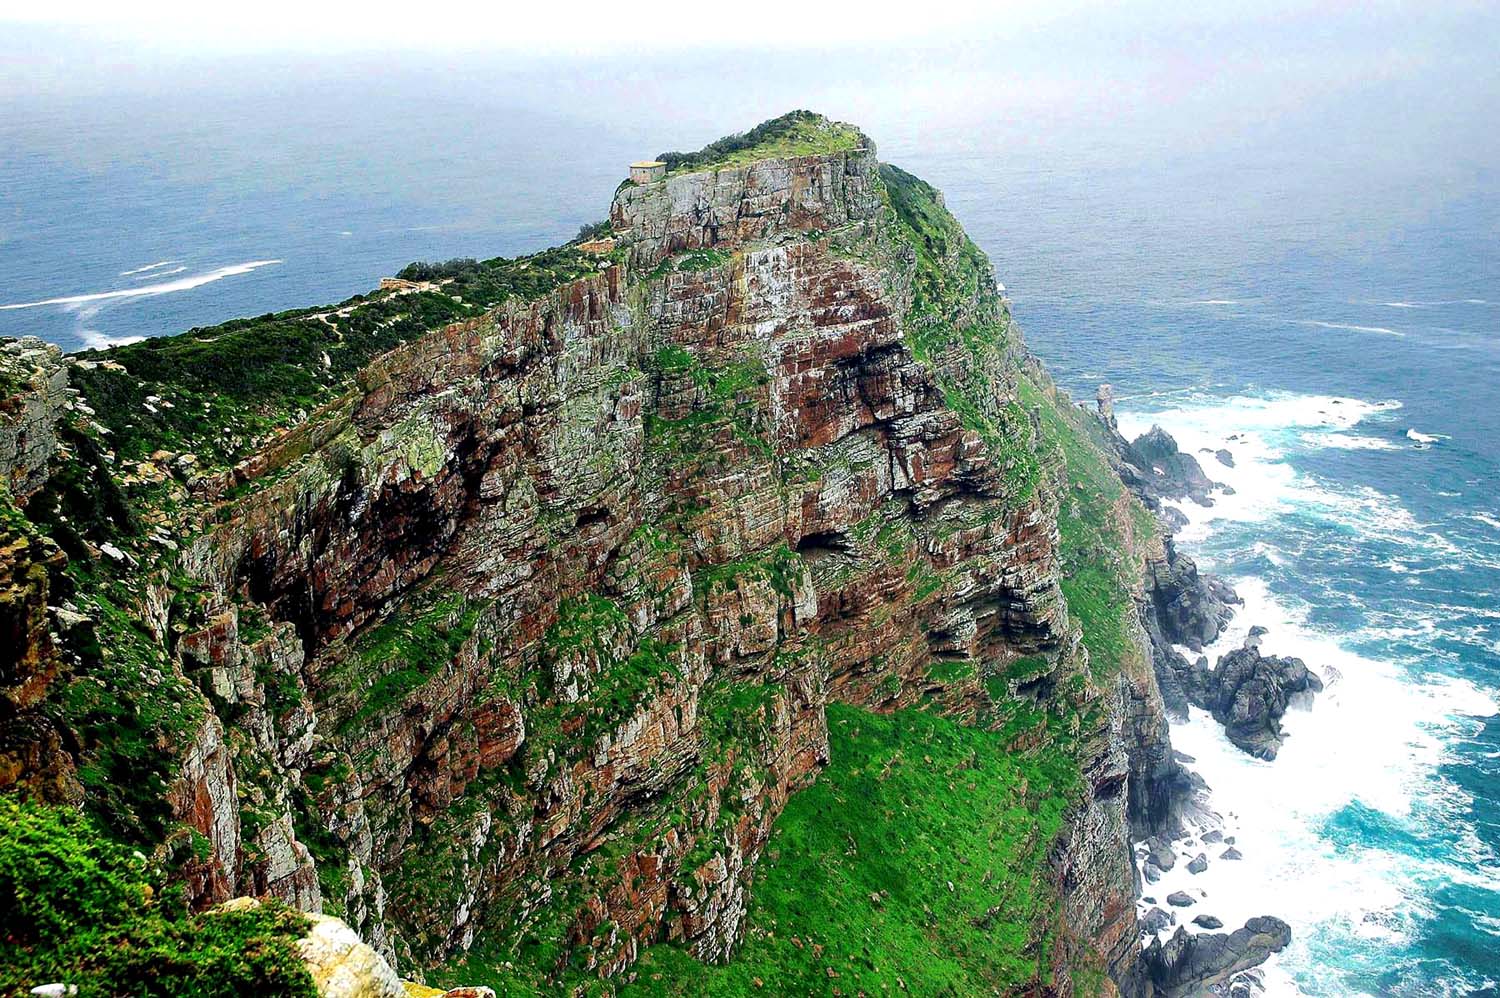 Website - A76 - Capepoint